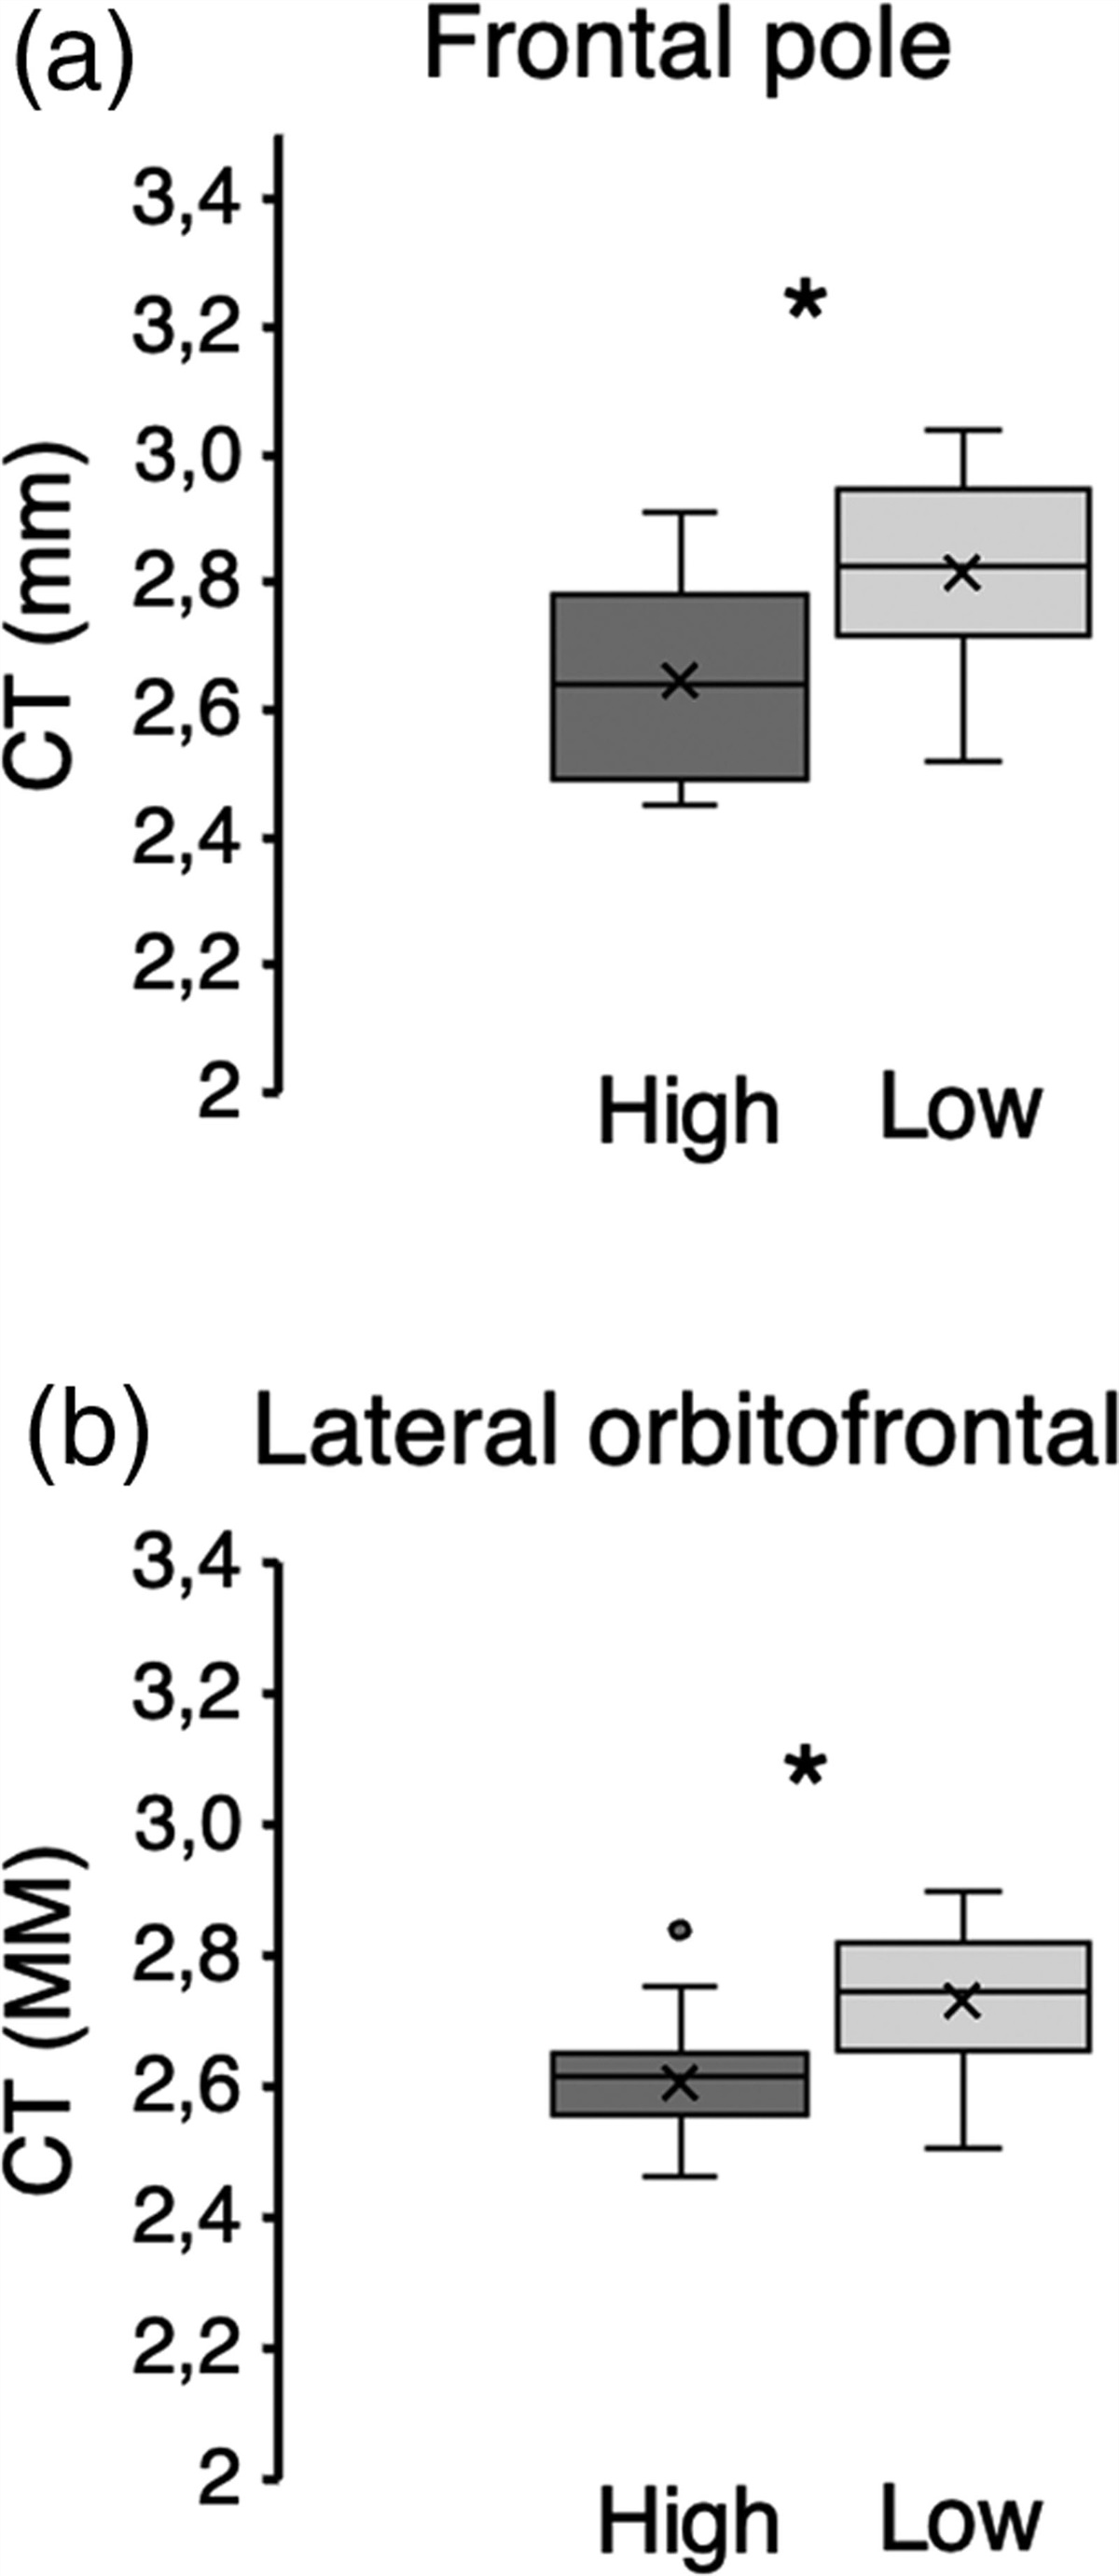 Exploratory analysis of cortical thickness in low- and high-fit young adults